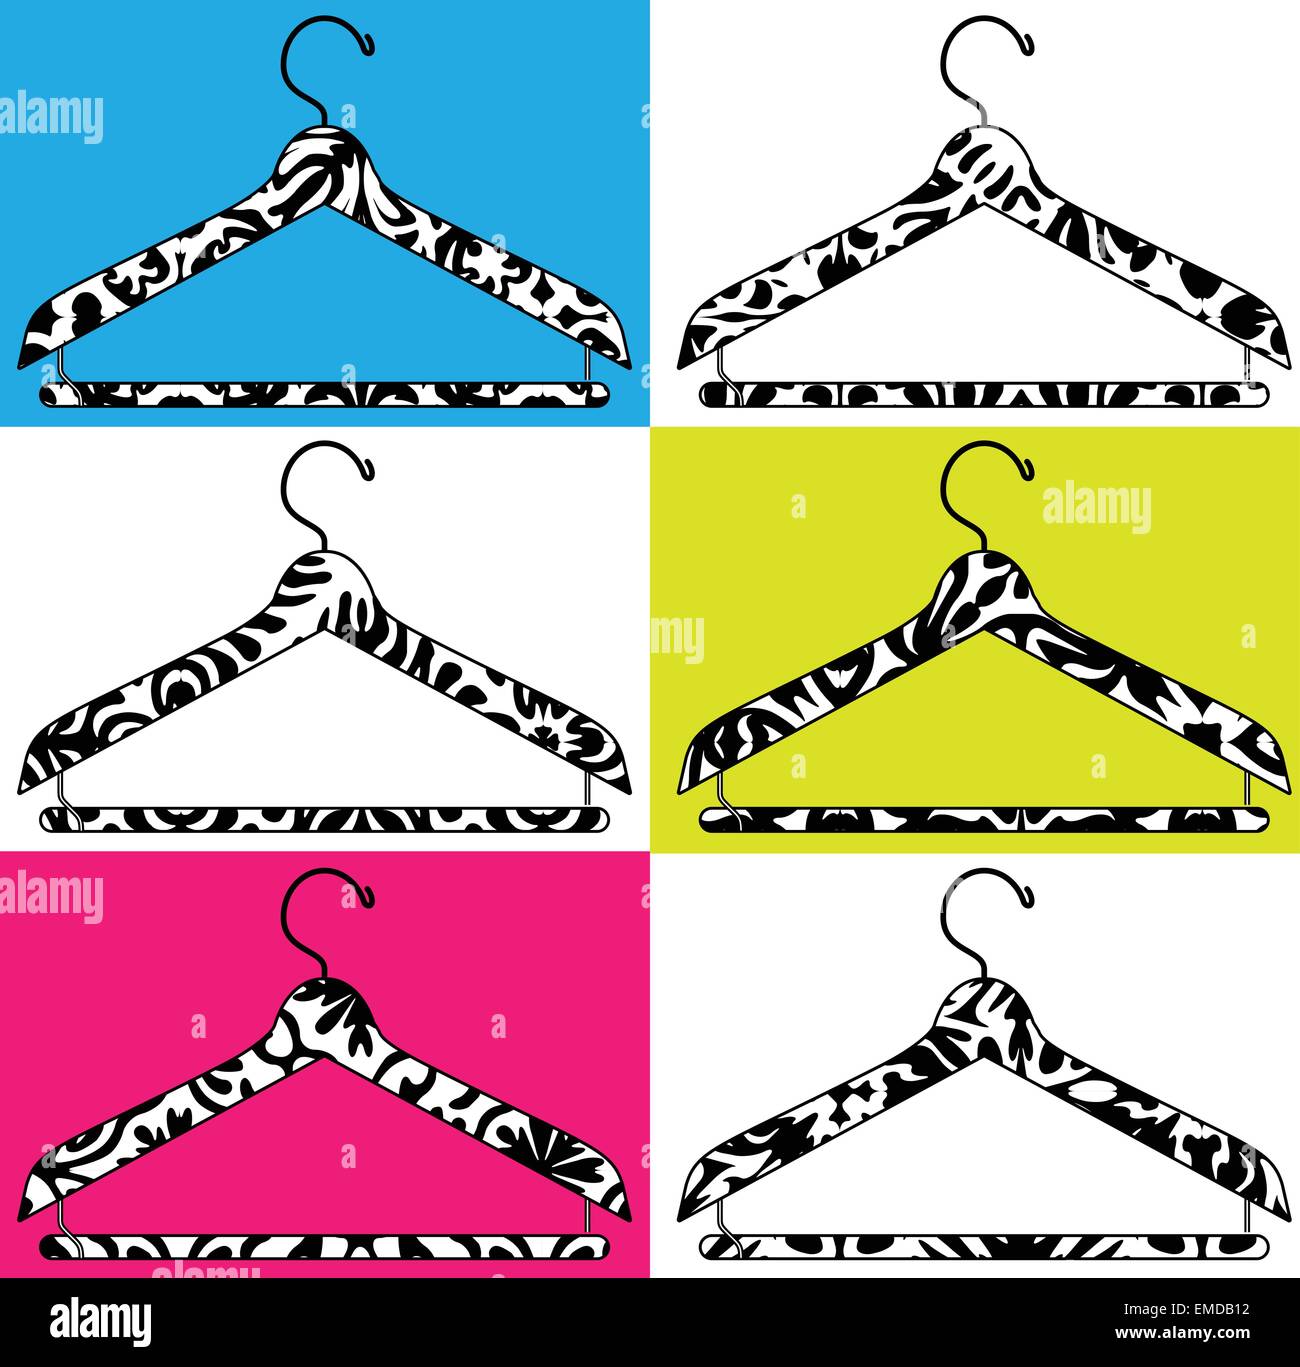 clothes hanger illustration Stock Vector